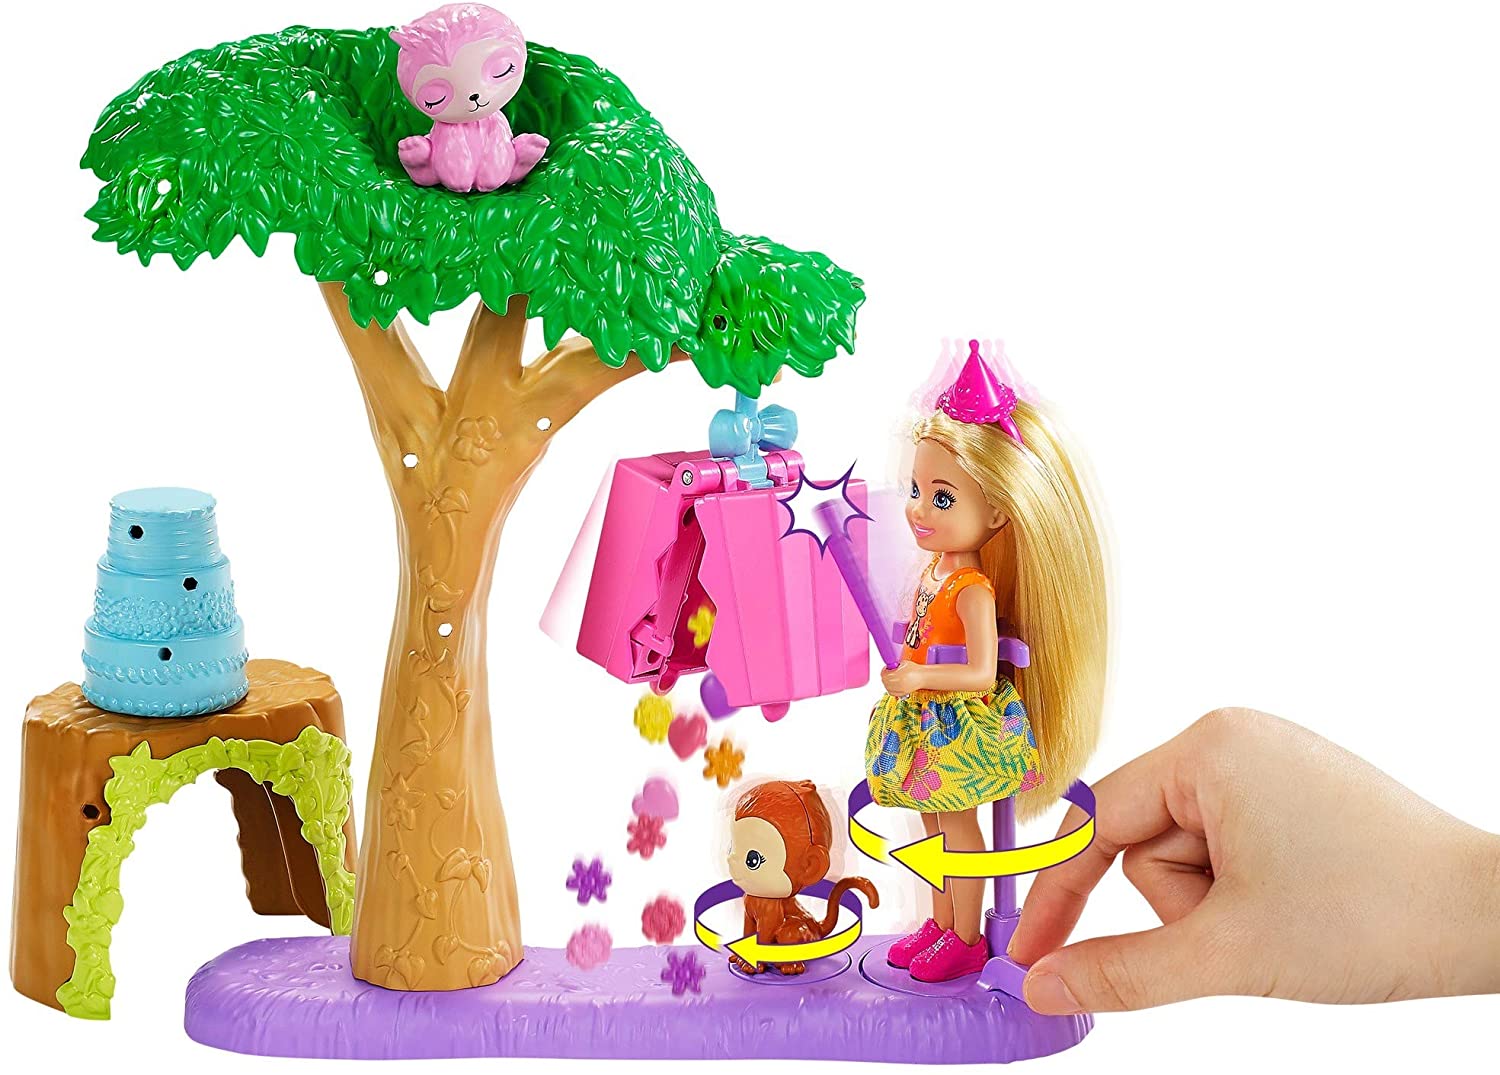 chelsea lost birthday barbie dolls playsets youloveit doll